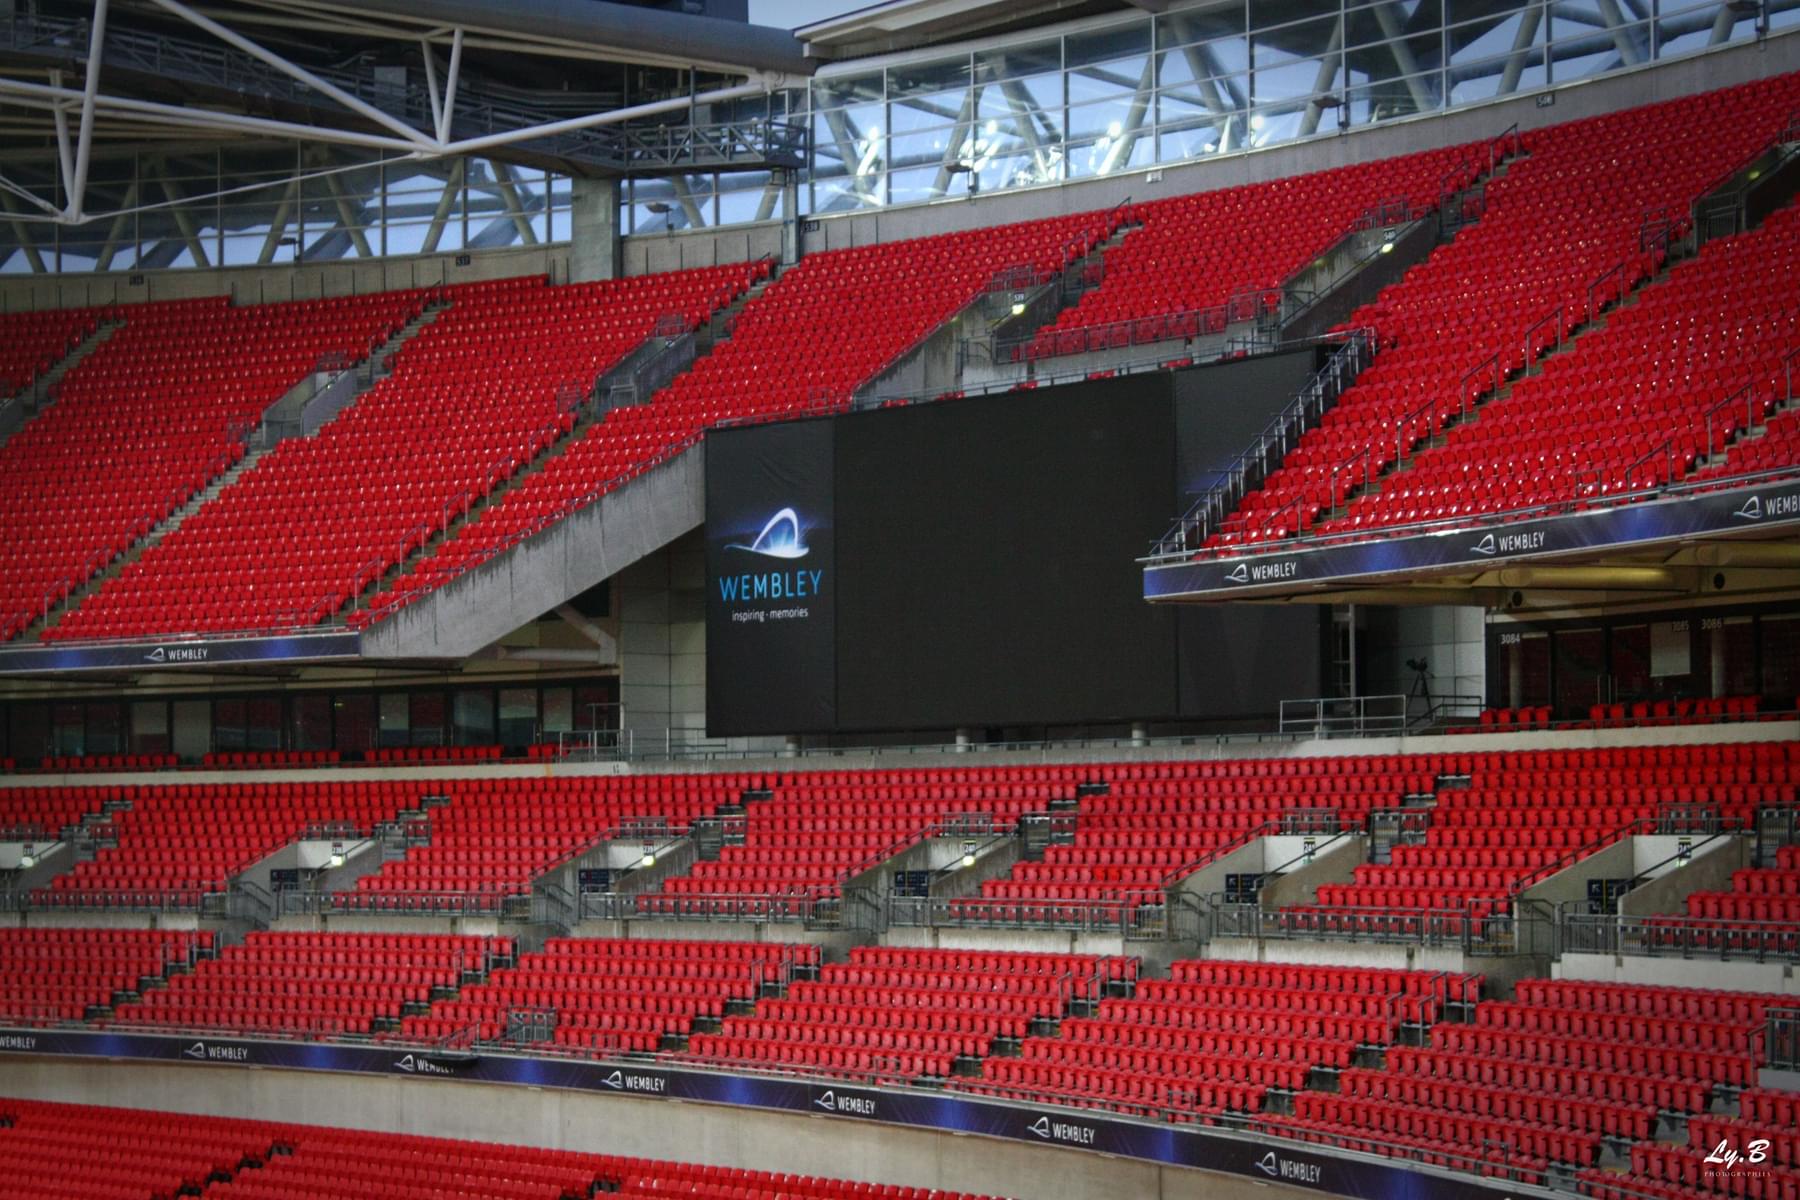  Facts About Wembley Stadium